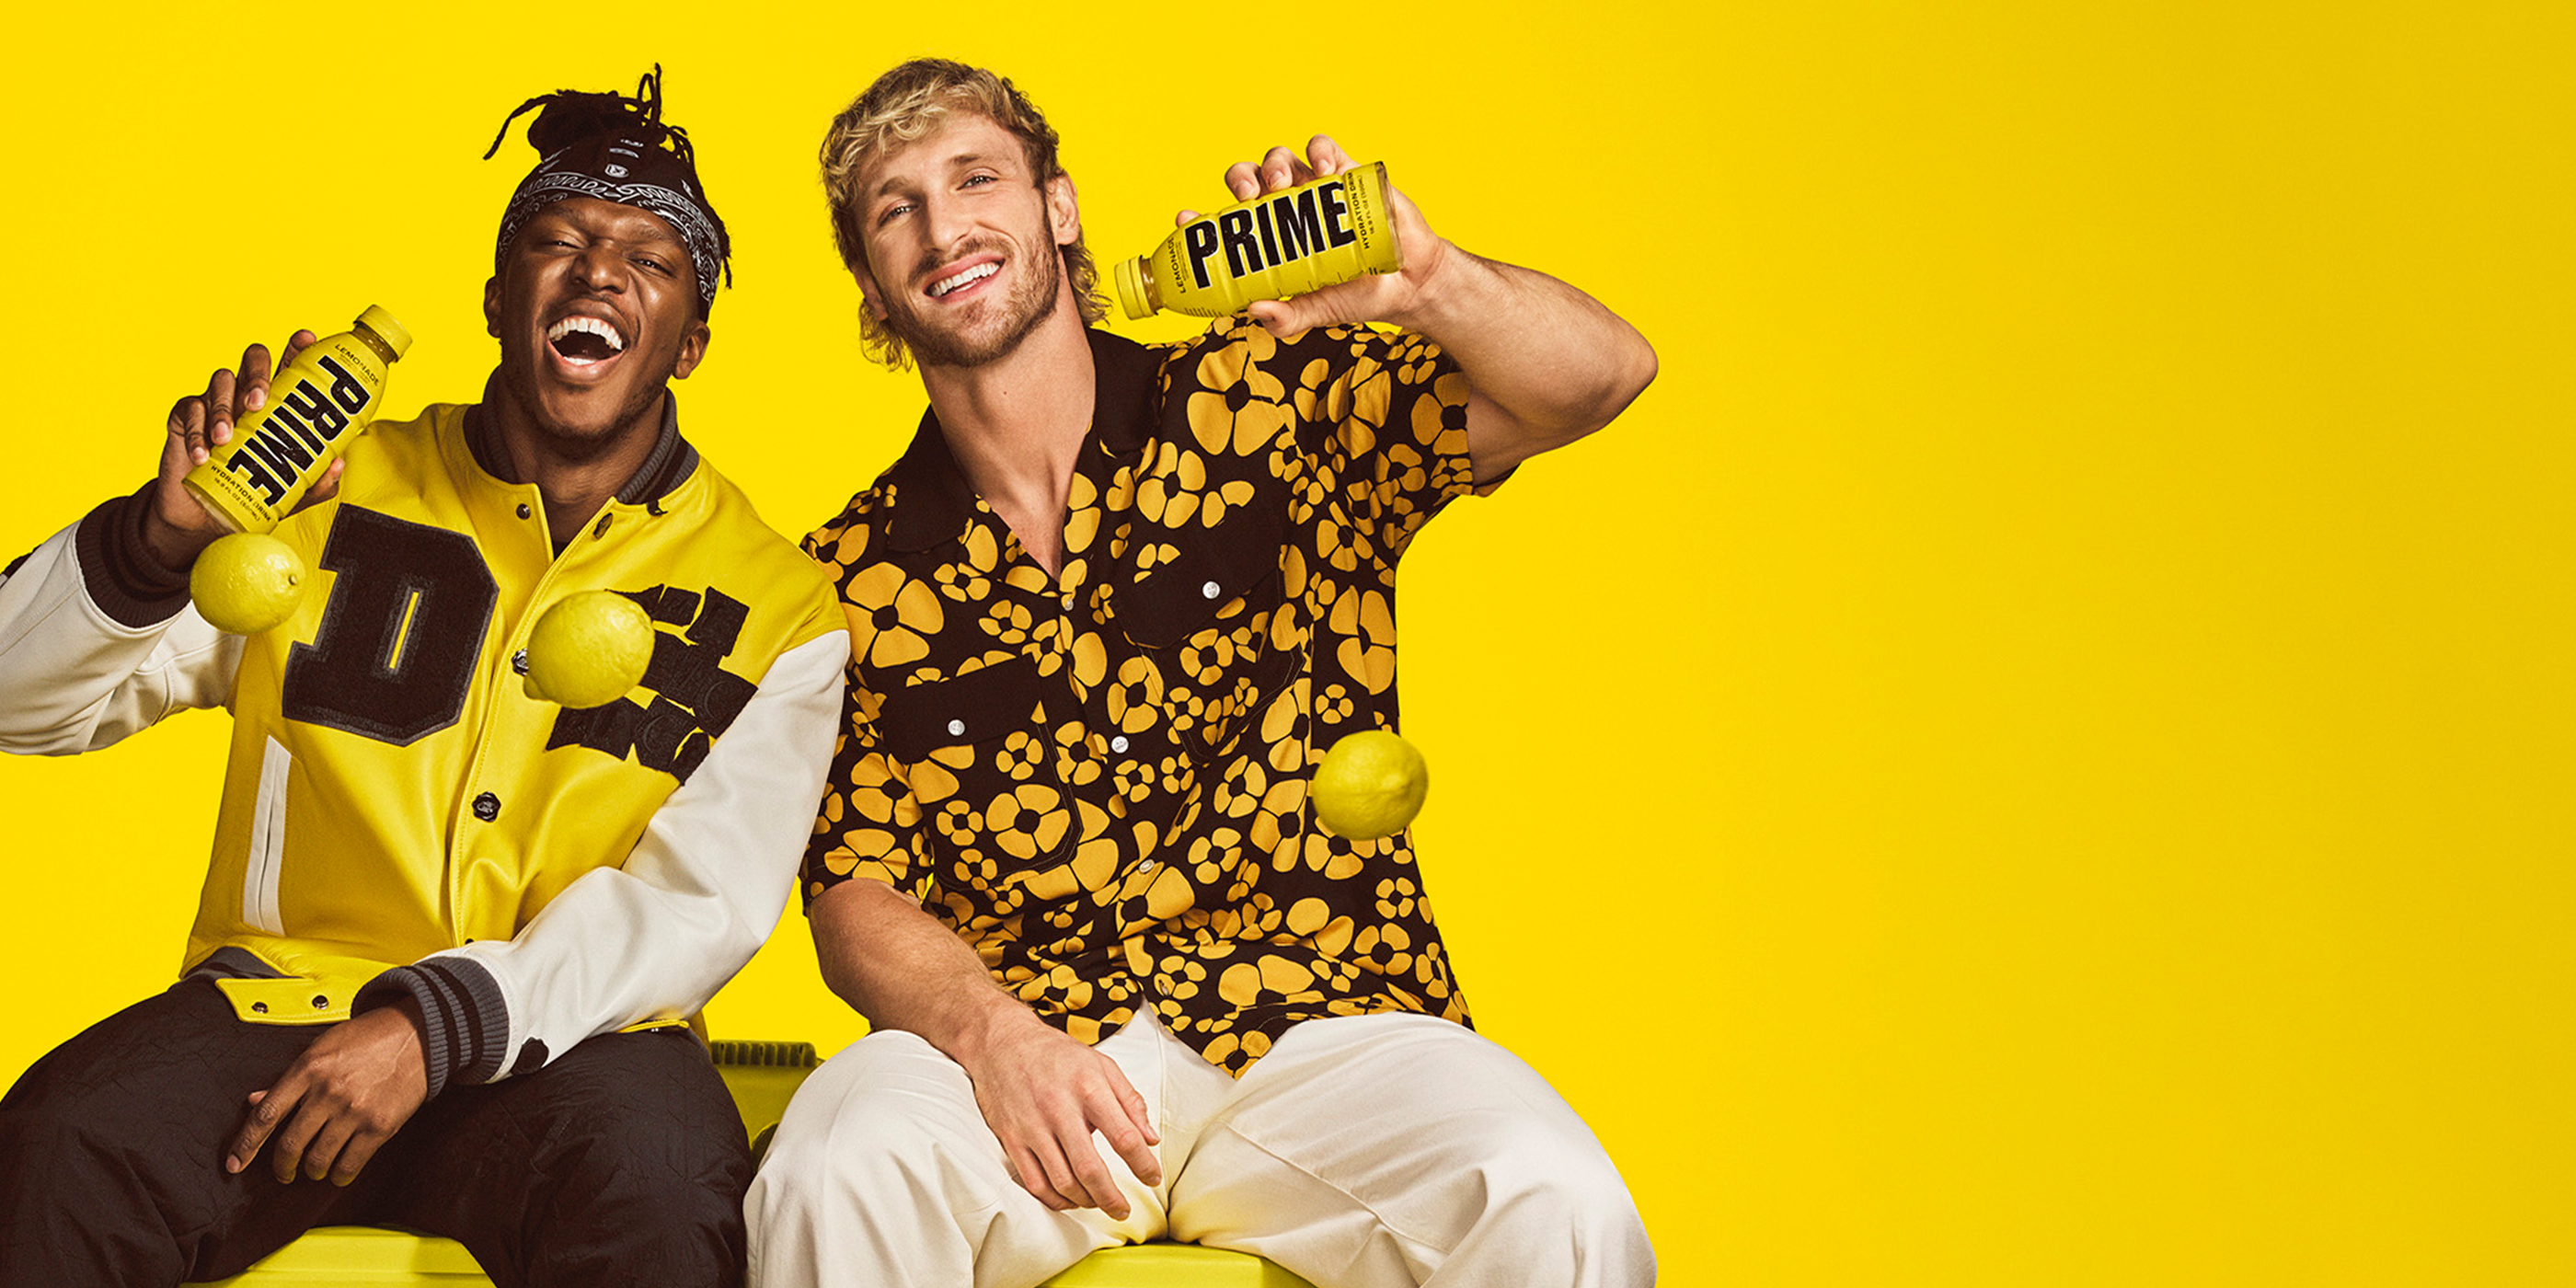 KSI and Logan Paul, each proudly displaying a Lemonade-flavored Prime hydration drink, adding to the lively atmosphere.